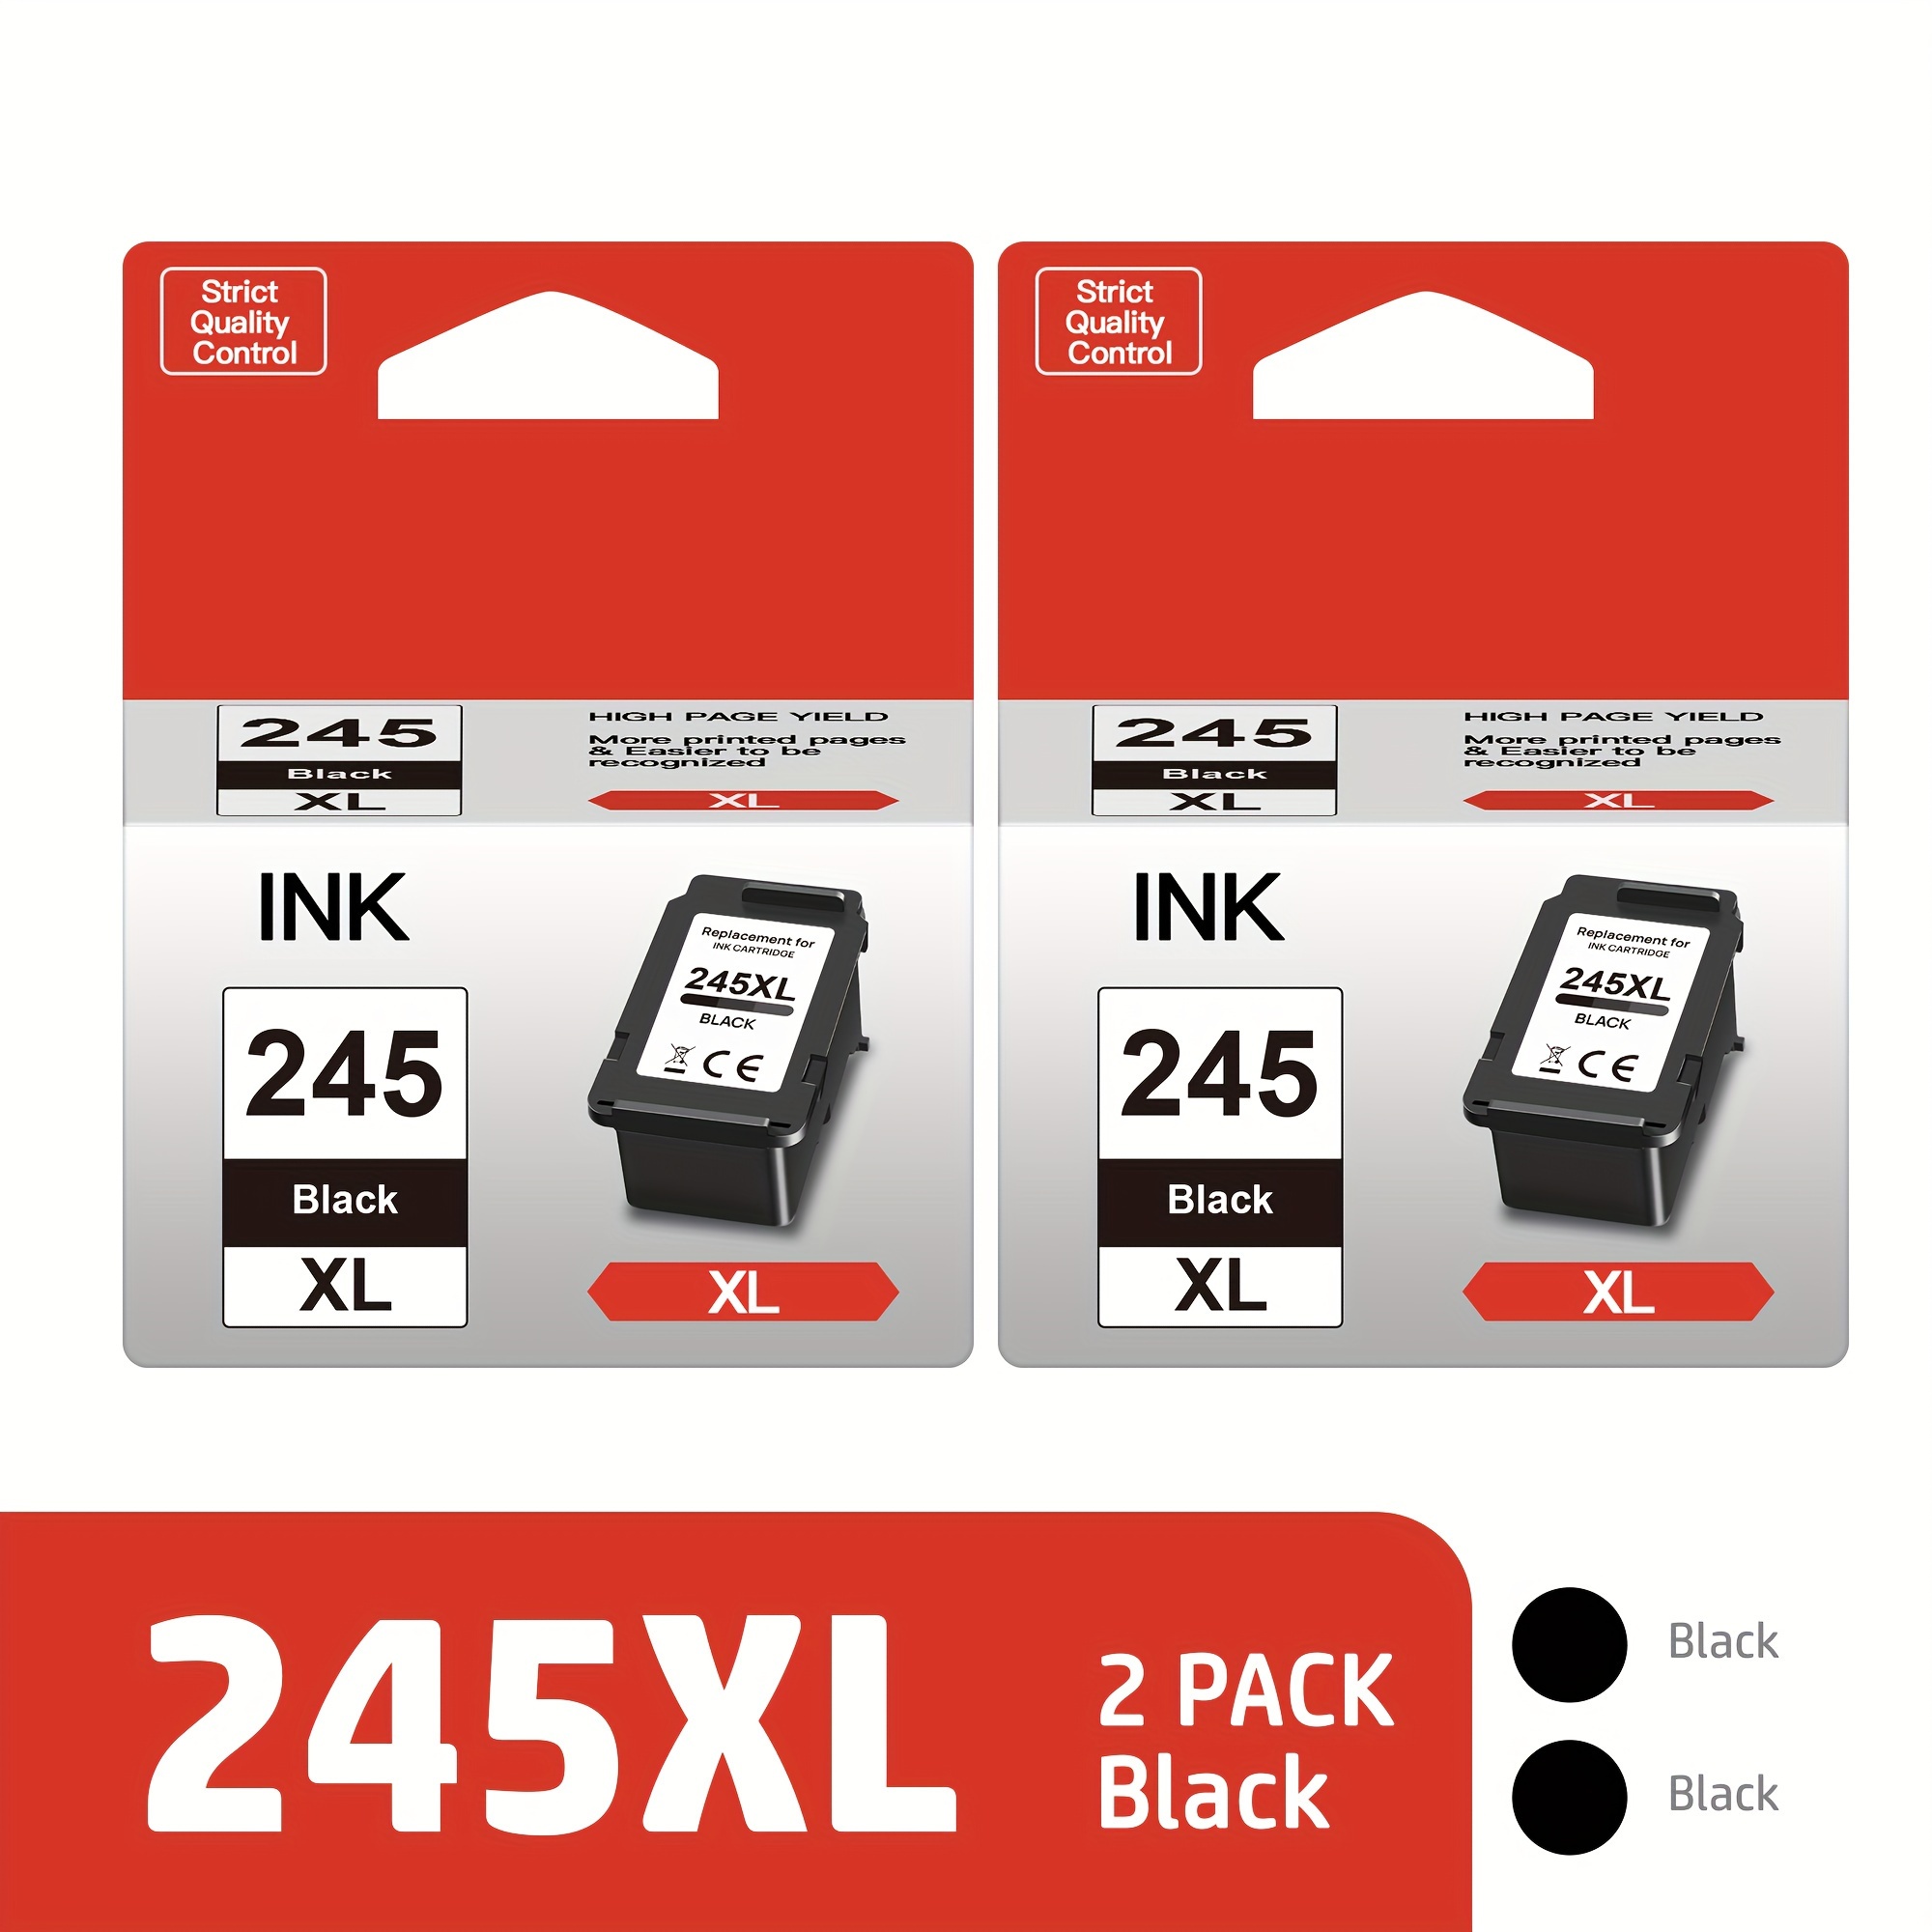 

2 Pack 245 Compatible 245xl Black Ink Cartridges Replacement For Pg 243 Pg-245 245 Xlfor Cannon Pixma Mx490 Mx492 Mg2522 Ts3100 Ts3122 Ts3300 Ts3320 Ts3322 Tr450 Mg2500 Printer Ink (2black)